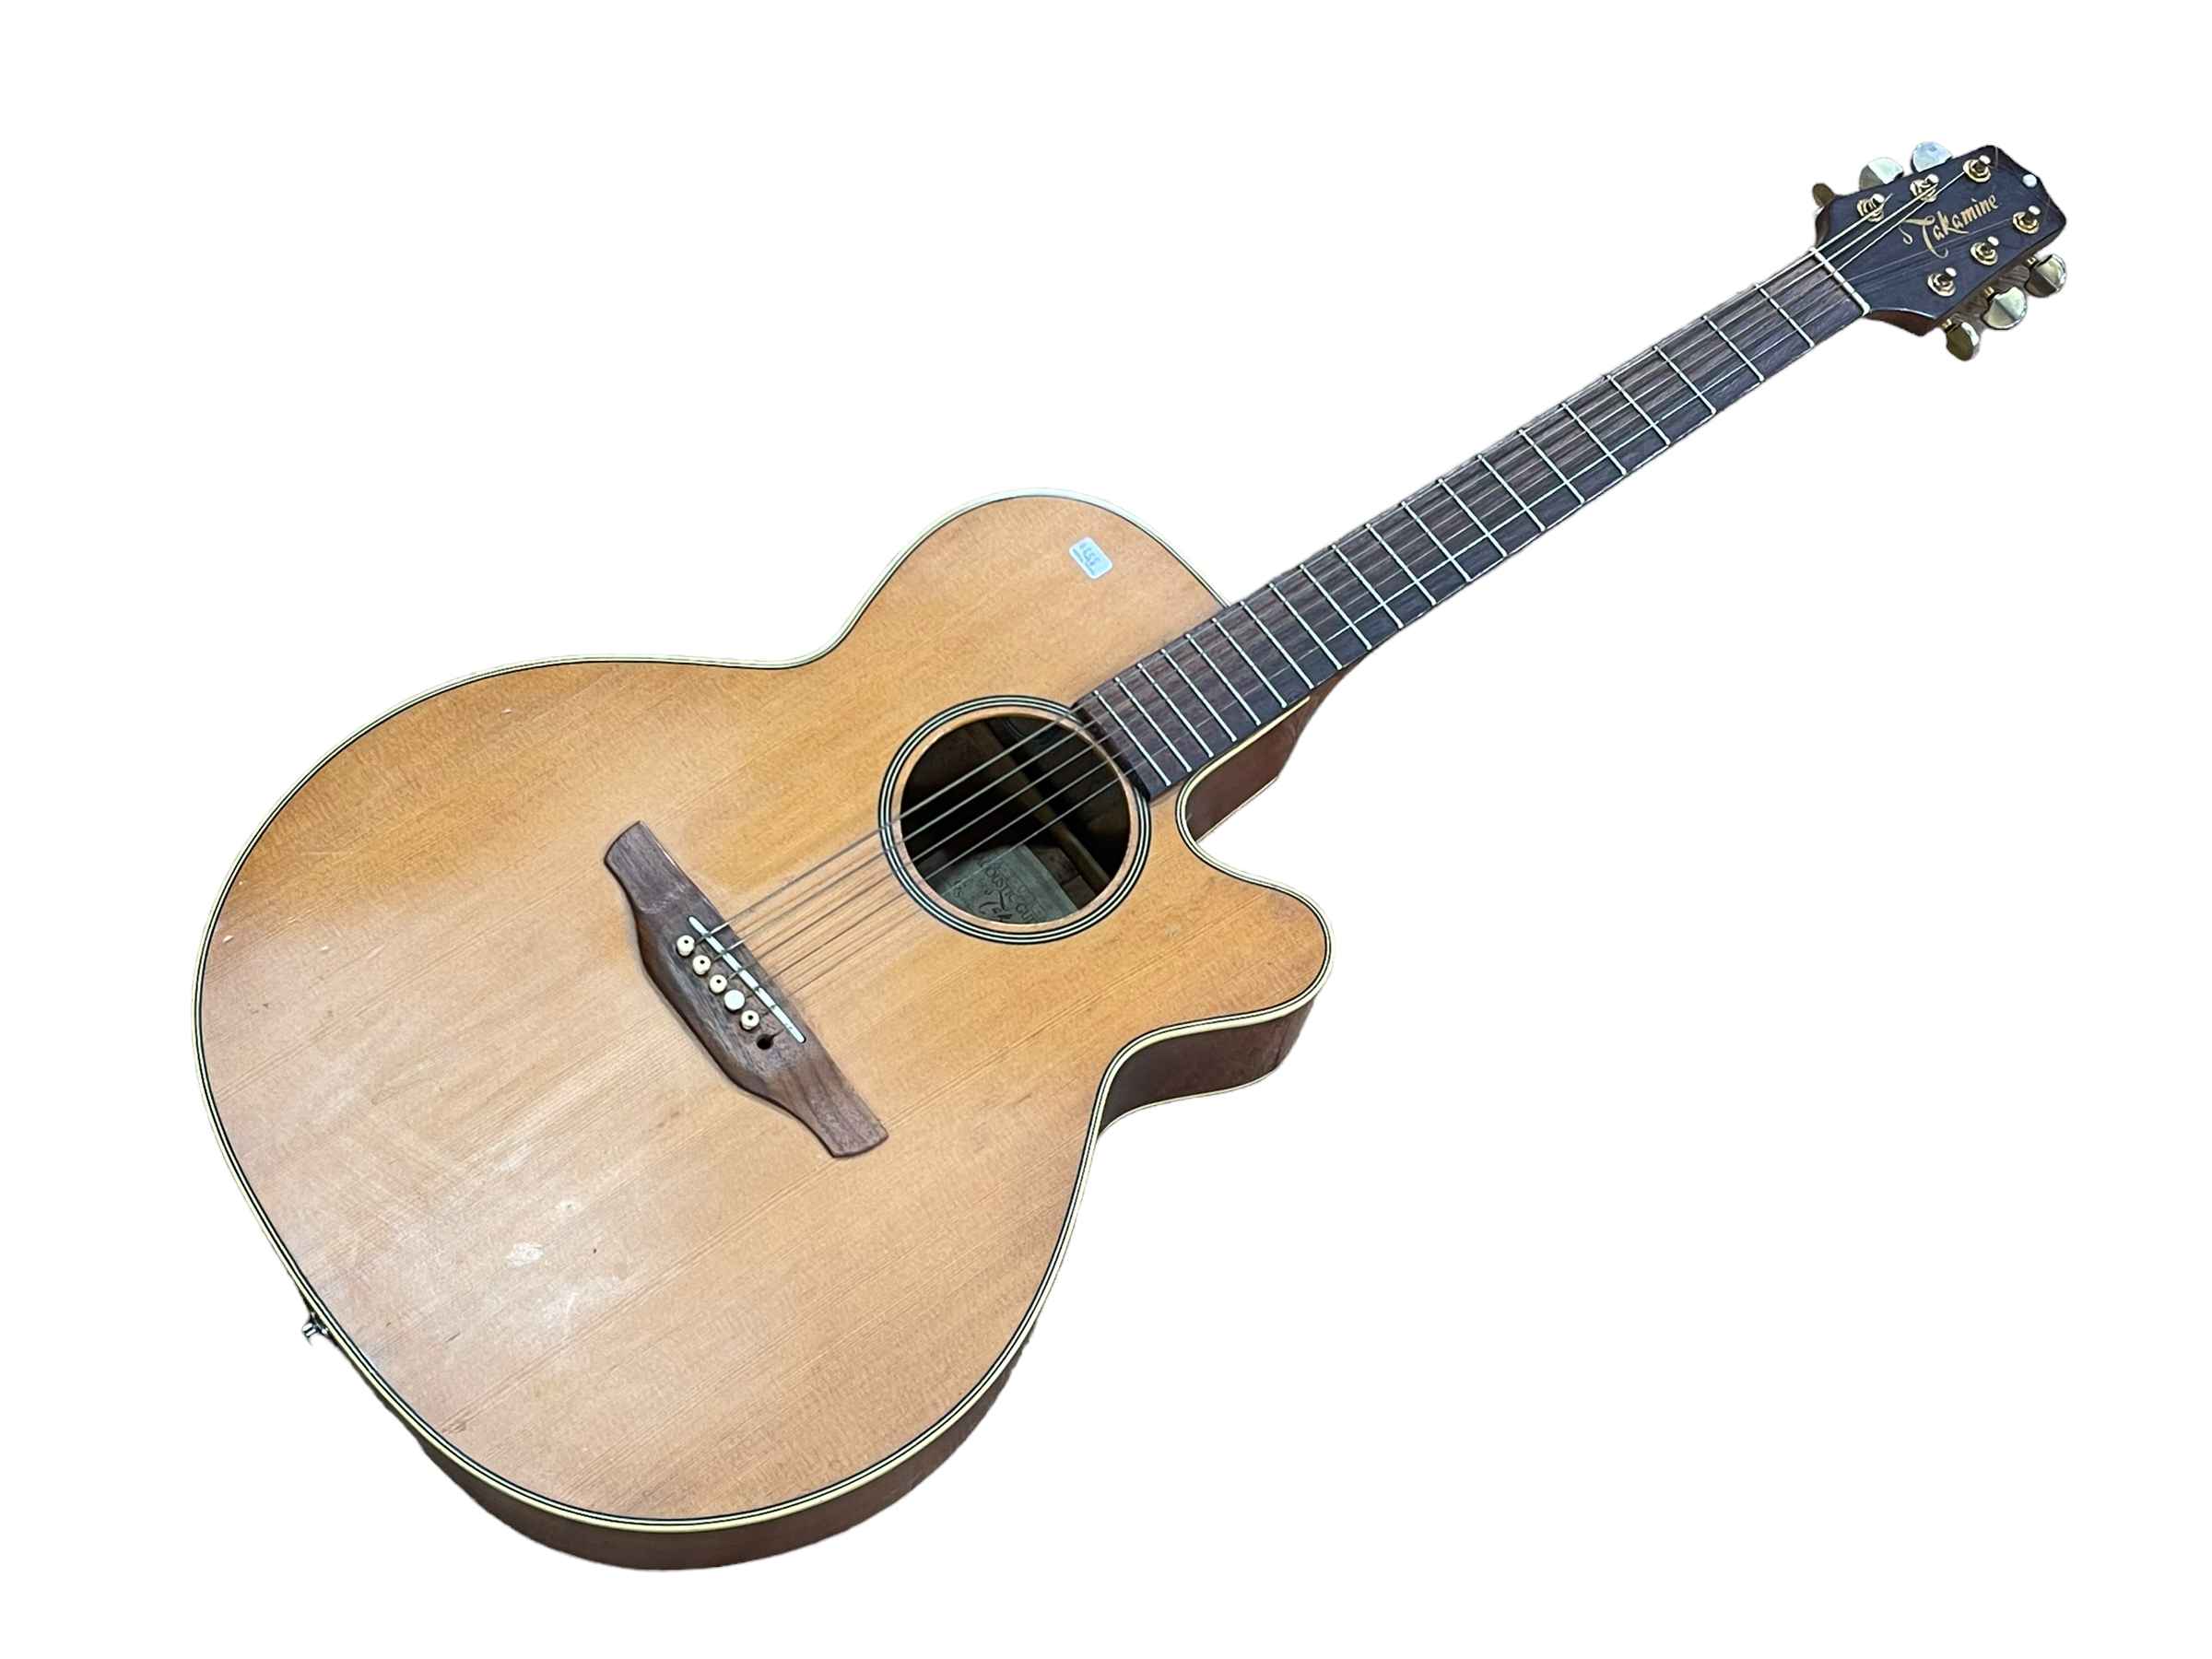 Acoustic guitar with label Takamine.